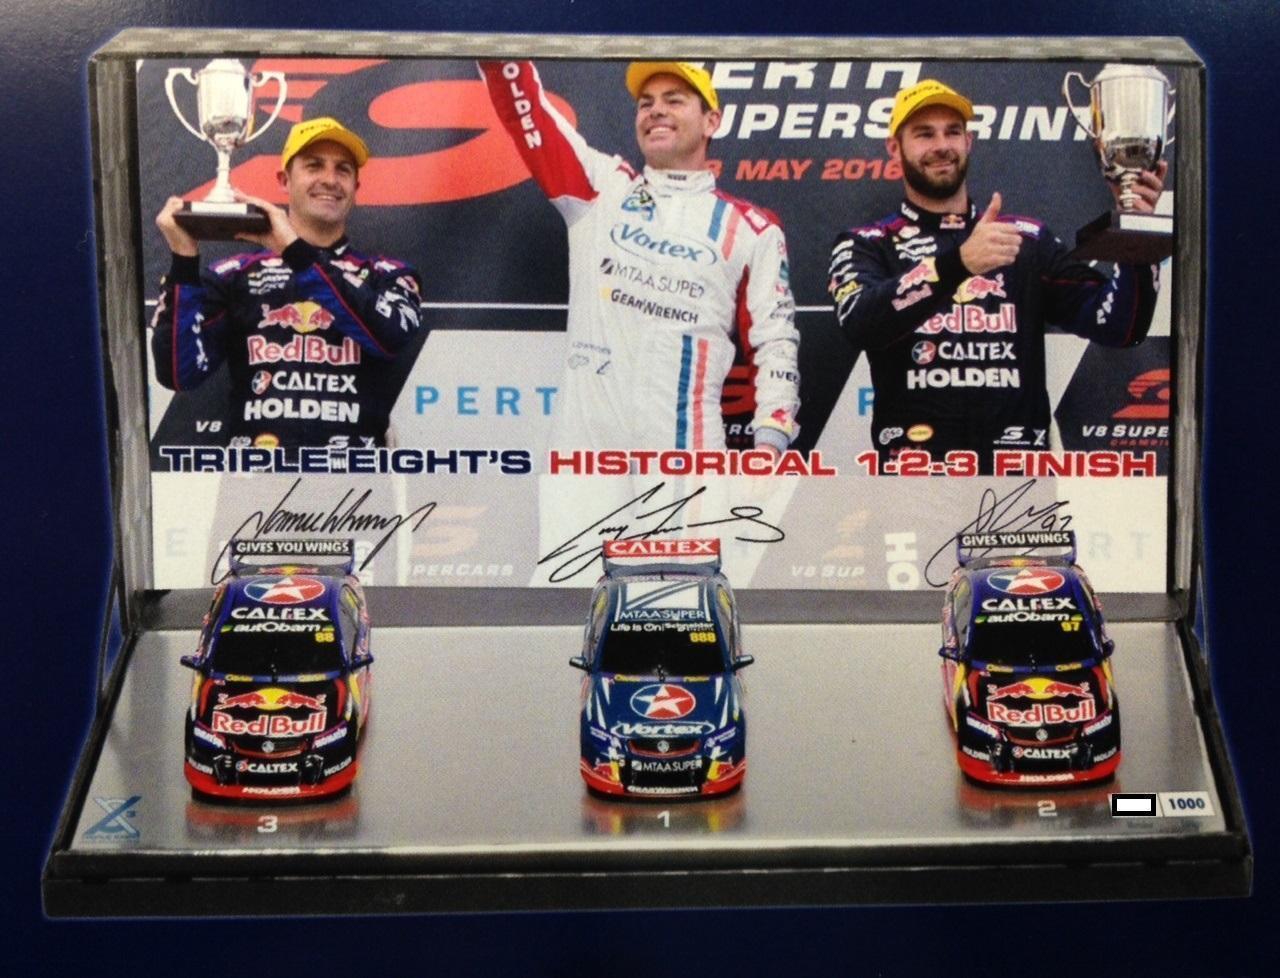 Lowndes/Van Gisbergen/Whincup Triple Eight's Historic Finish